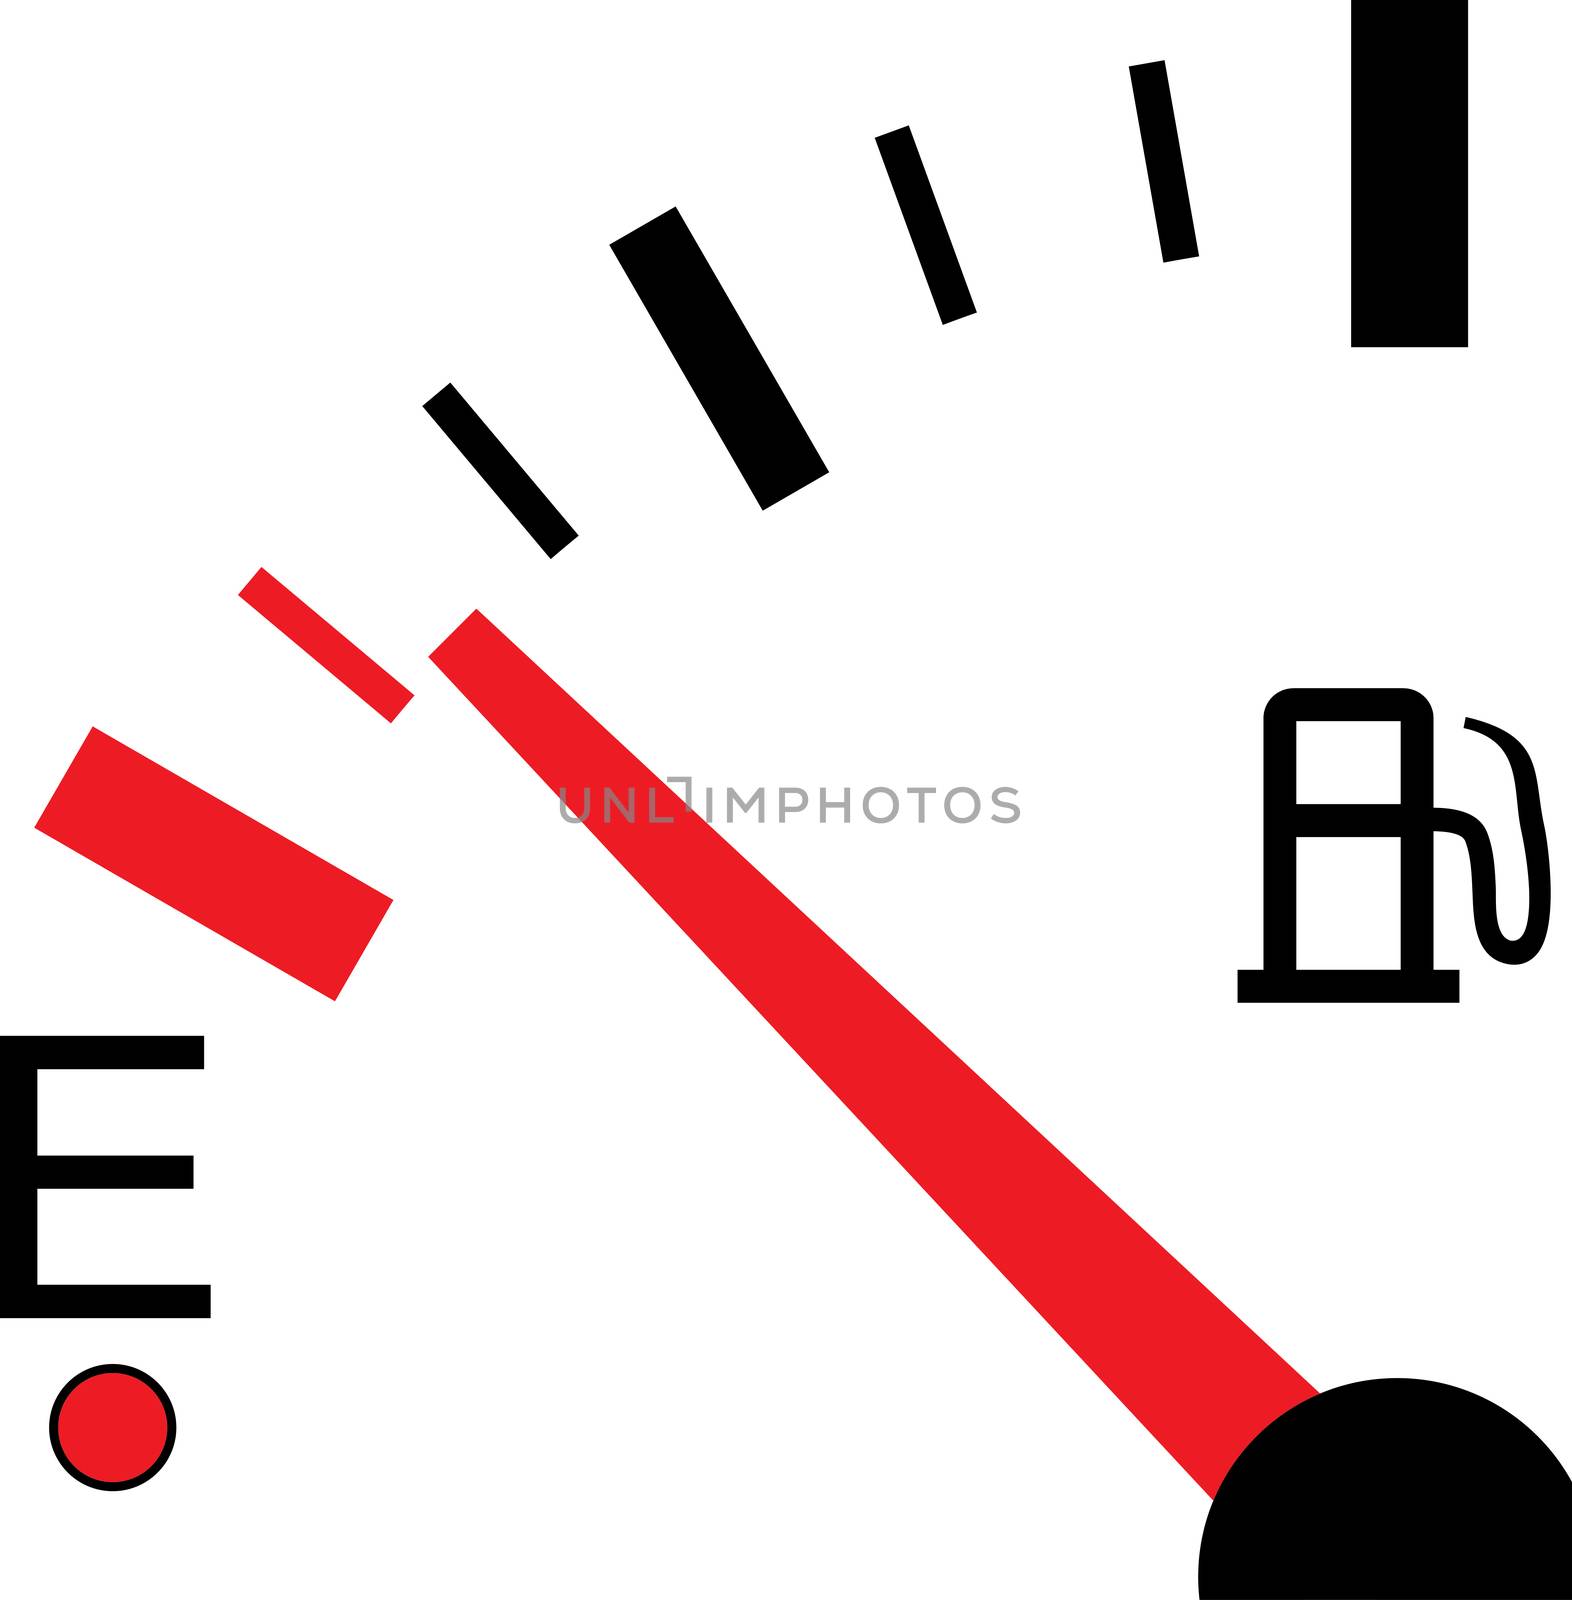 An Illustration of a Fuel Gauge on White Background